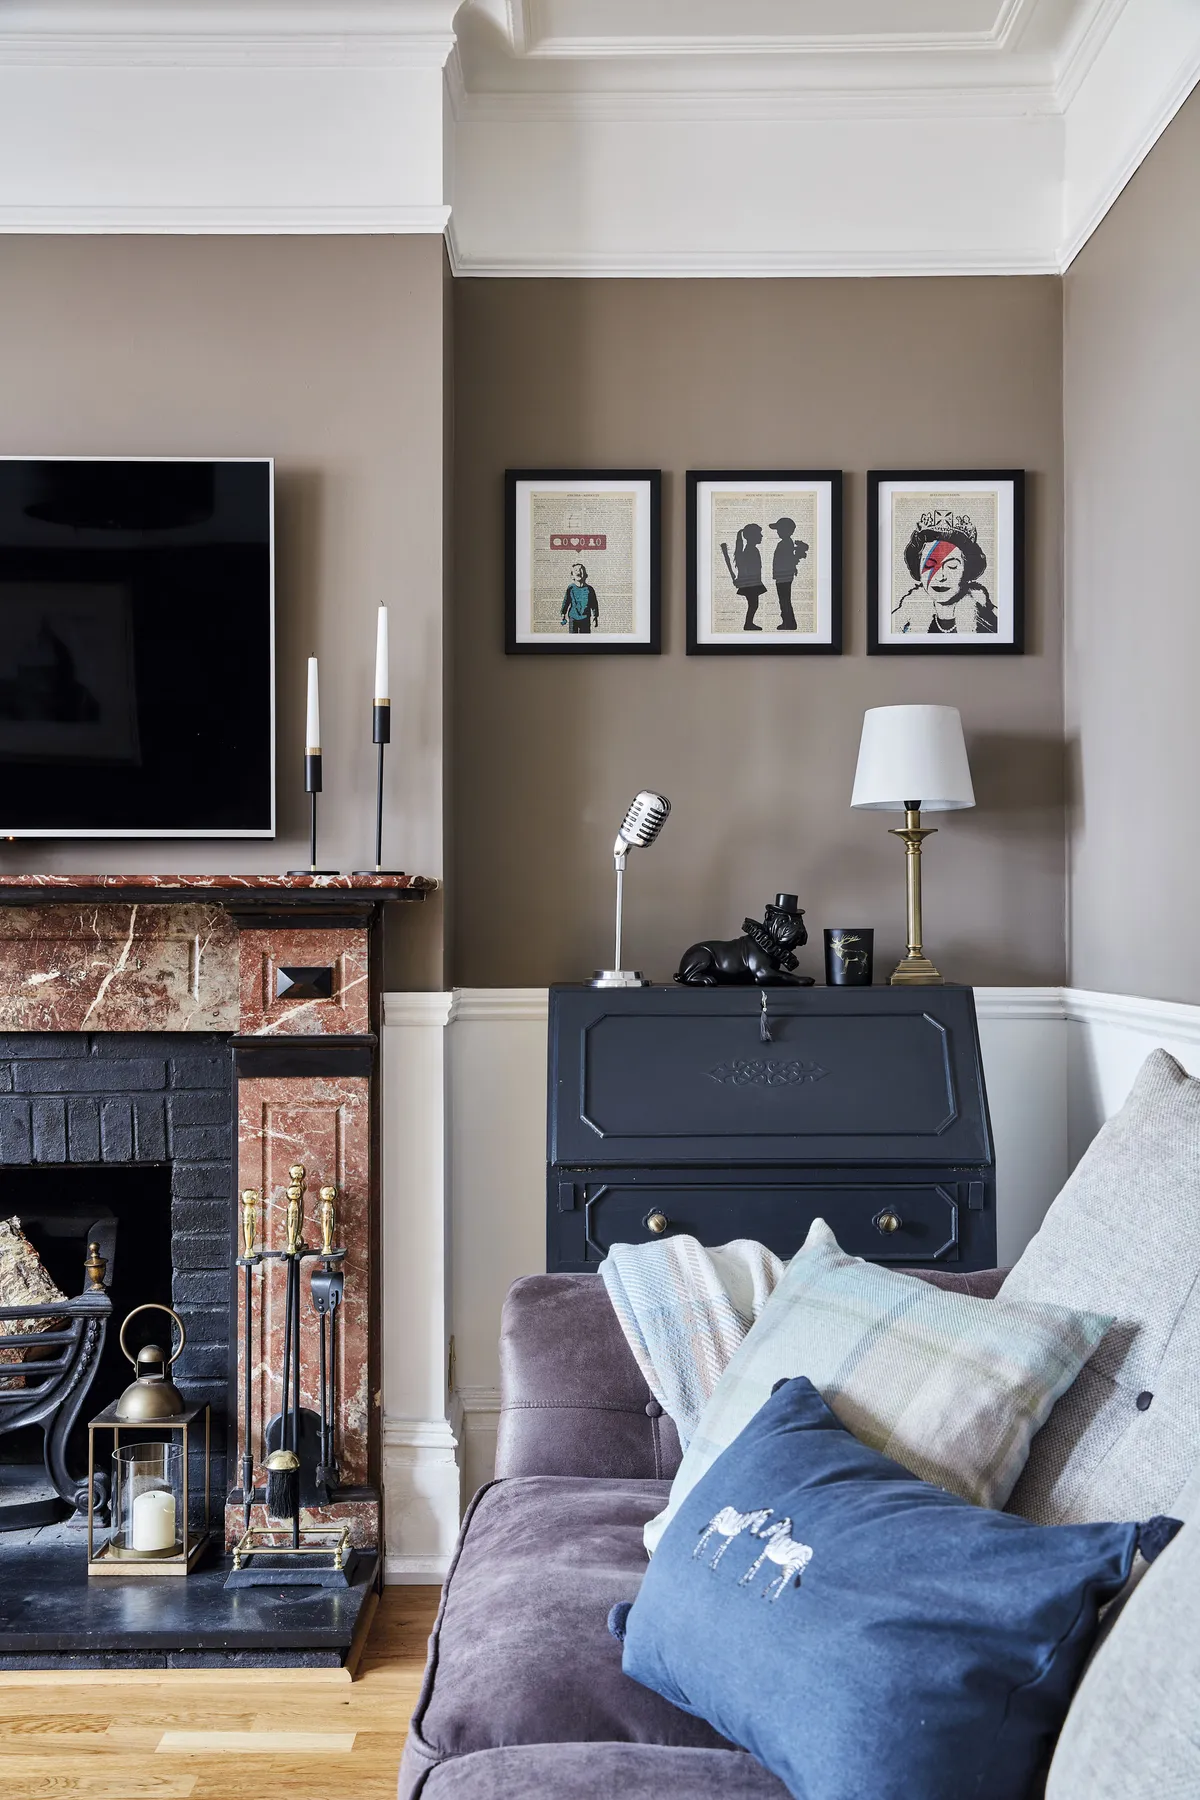 Taking pride of place in the living room is the unusual marble fire surround. ‘The fire basket was from our old home,’ explains Sharon. ‘It was in our garden for about eight years just sitting there waiting for the moment when we could use it again’